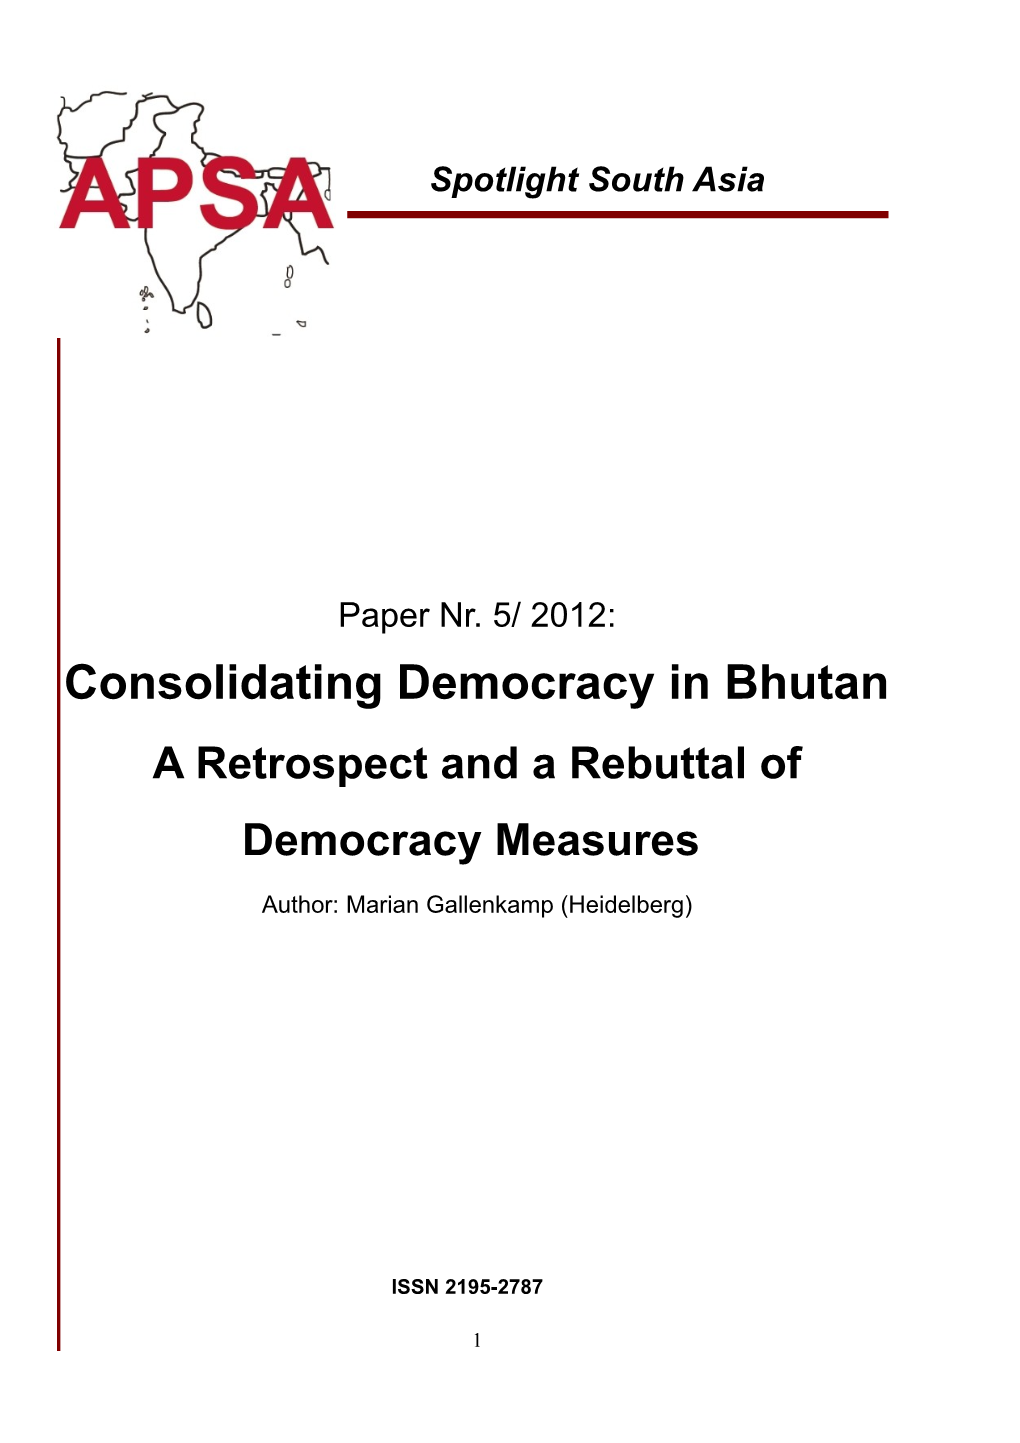 Consolidating Democracy in Bhutan a Retrospect and a Rebuttal of Democracy Measures